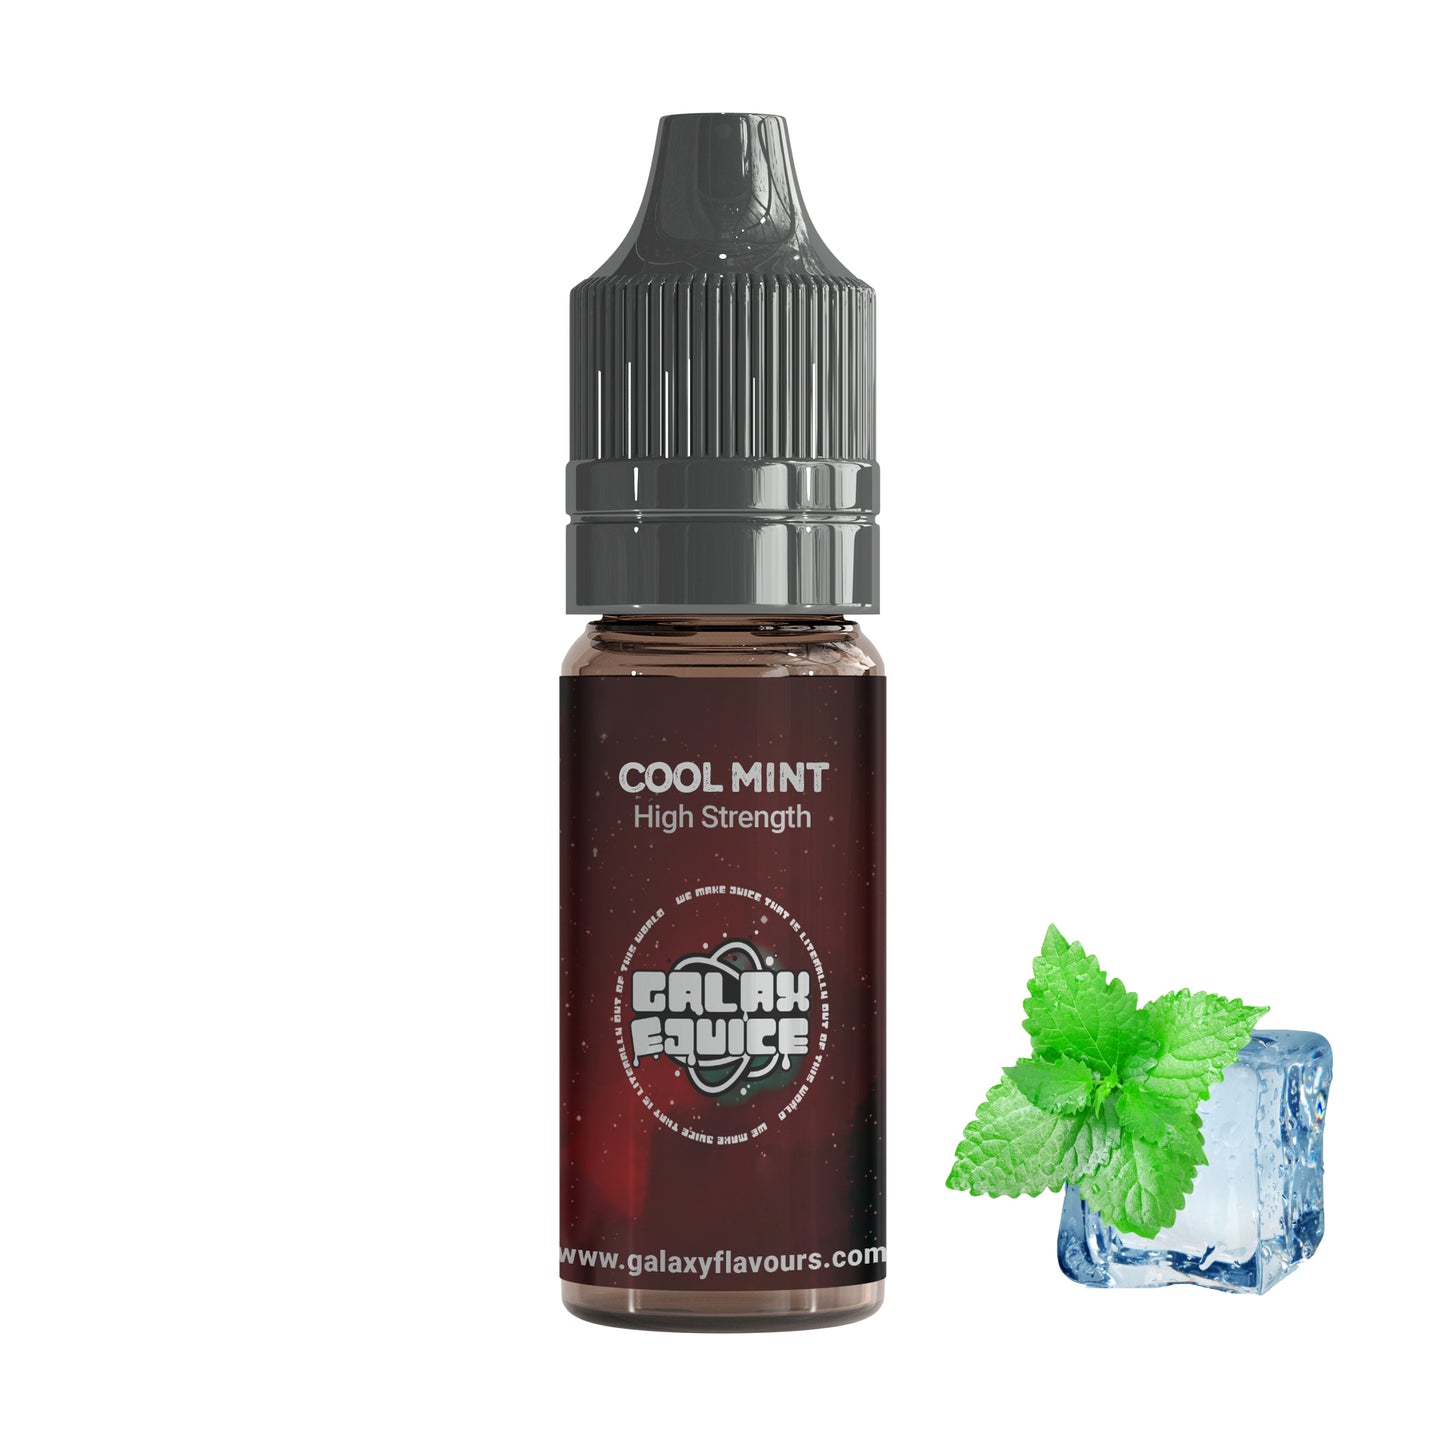 Cool Mint High Strength Professional Flavouring.